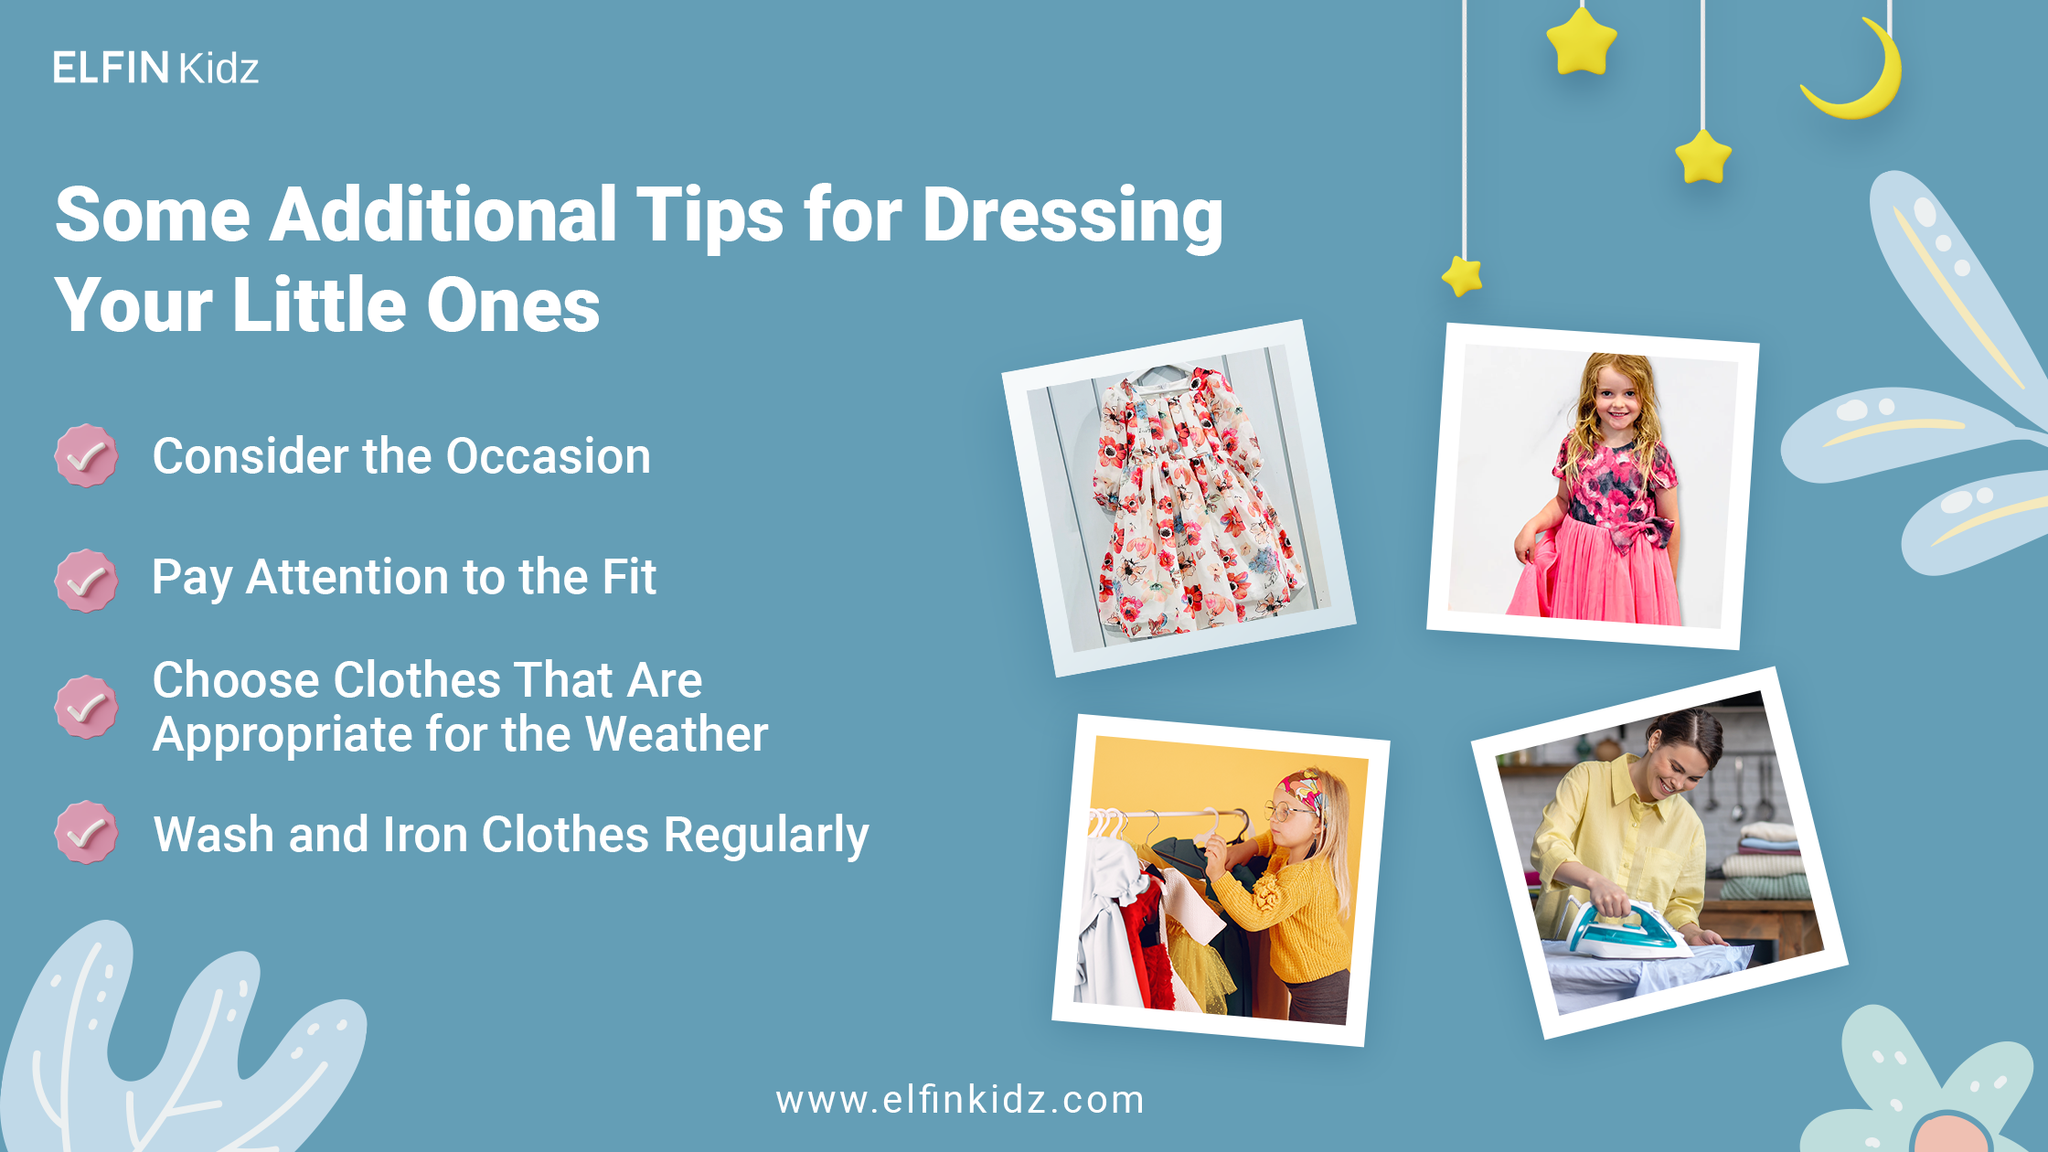 Some additional tips for dressing your little ones